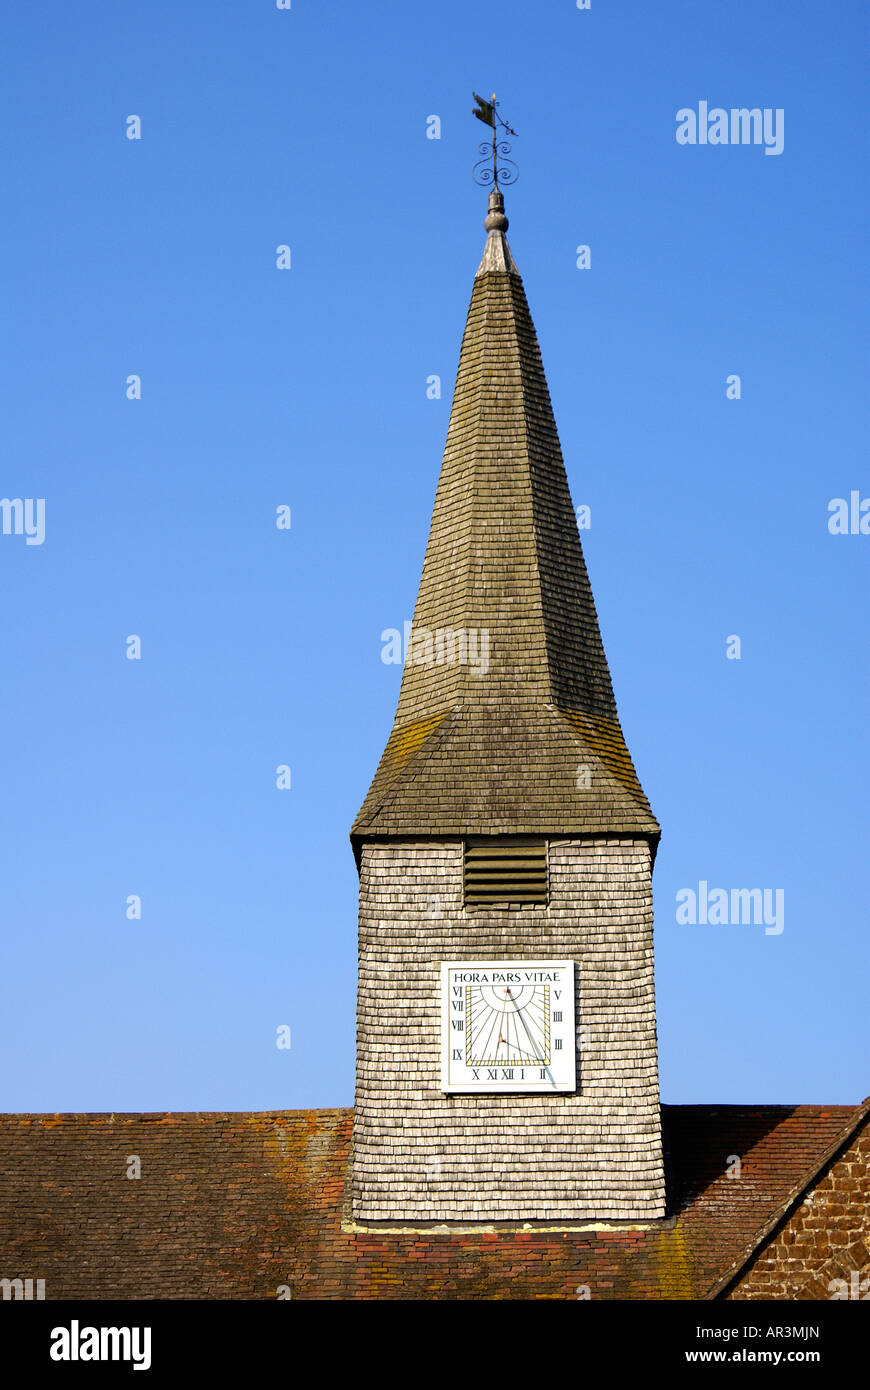 St Michael and All Angels Church in Thursley Surrey Stock Photo